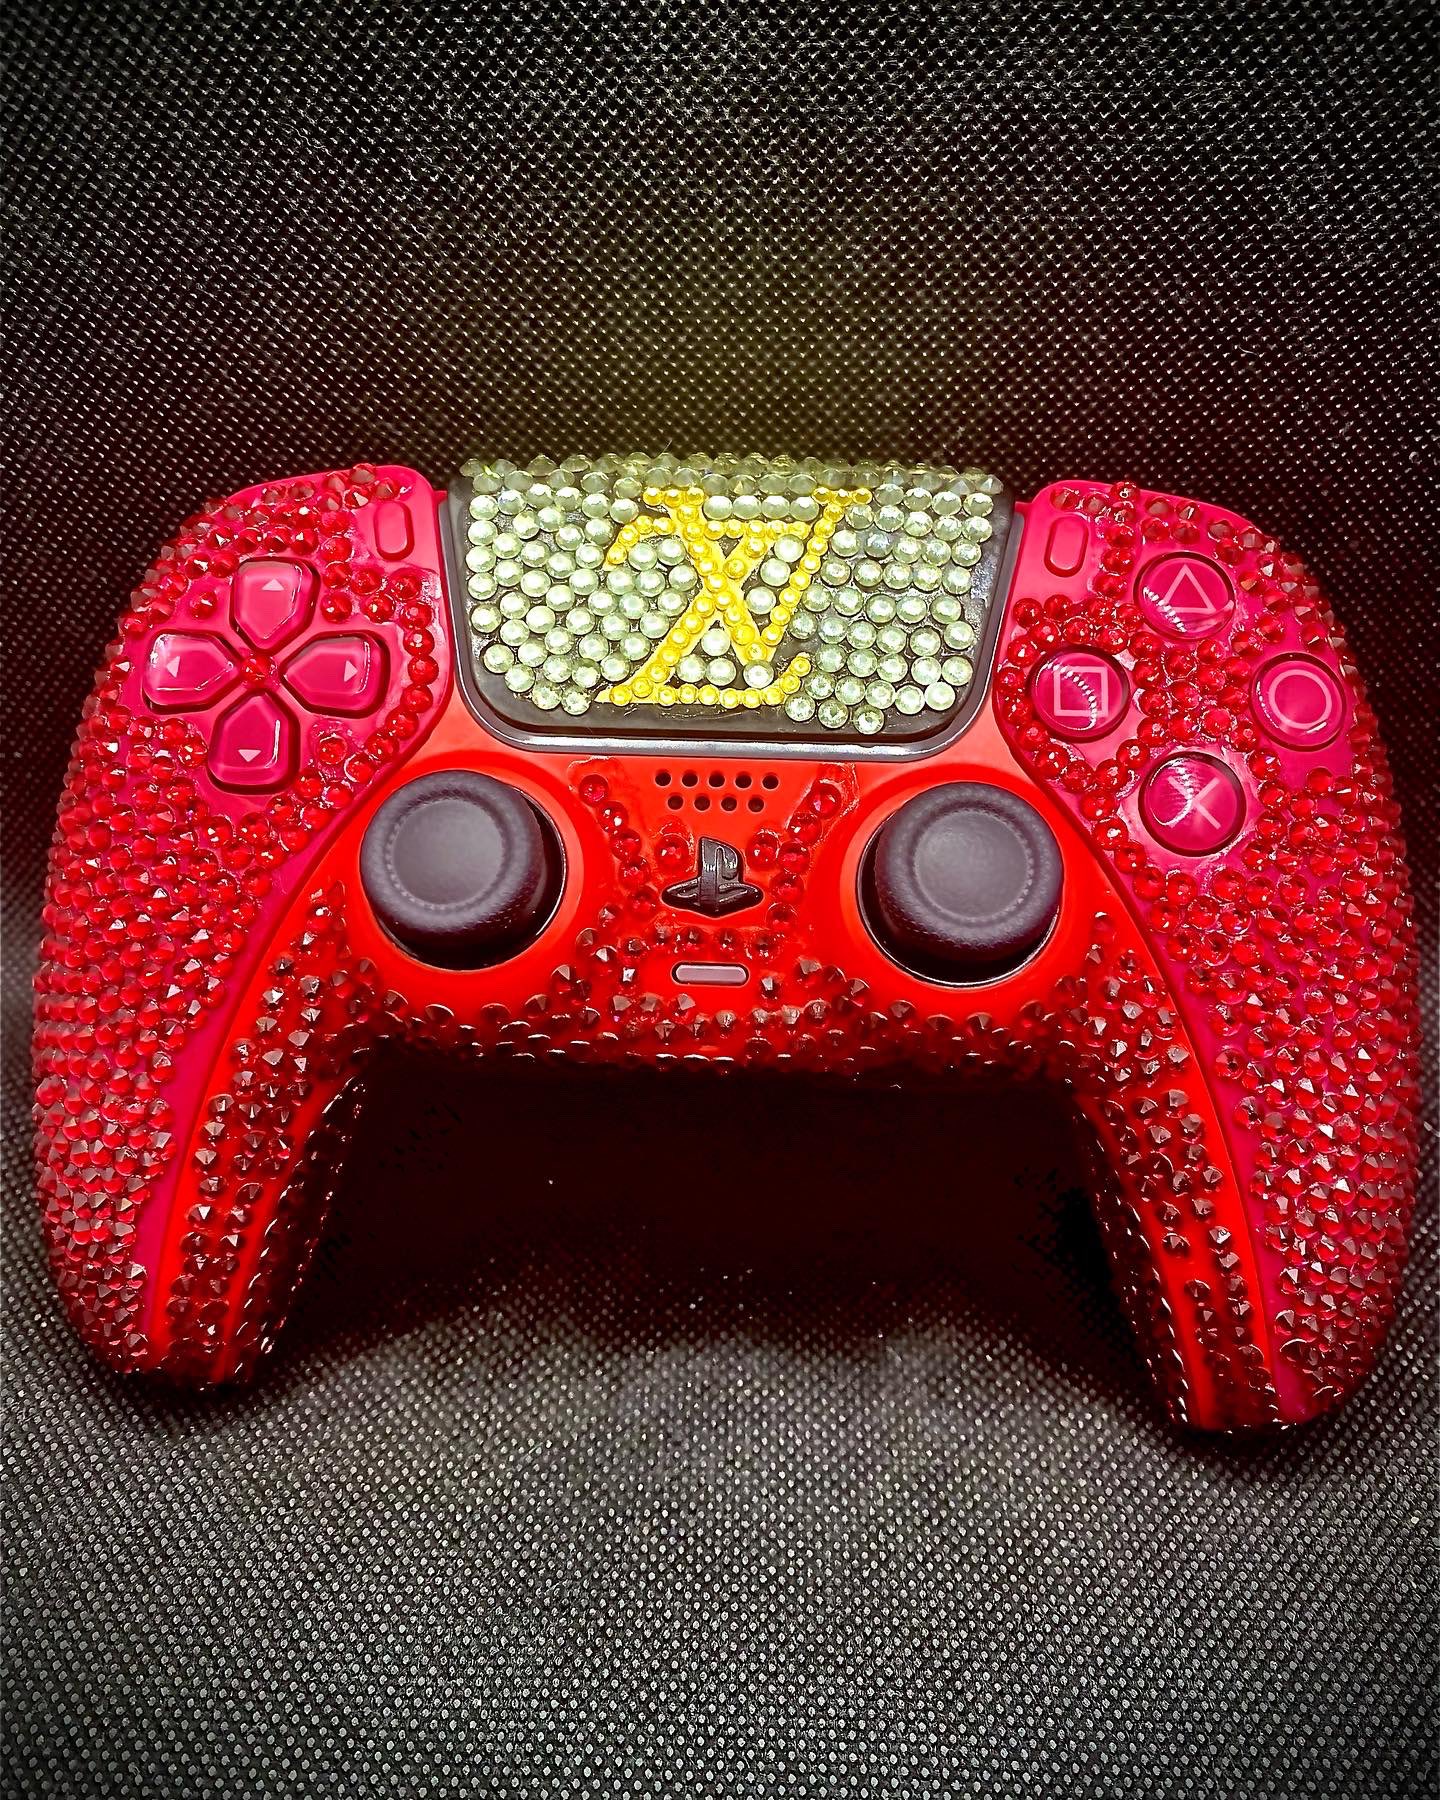 Kustom Kontrollerz™ on X: Closer look at @ZelinaVegaWWE Kustom Kontroller  🎮💎she used for her promo this past week on #SmackDown using over 2500  crystals to bring it to life! @WWE  /